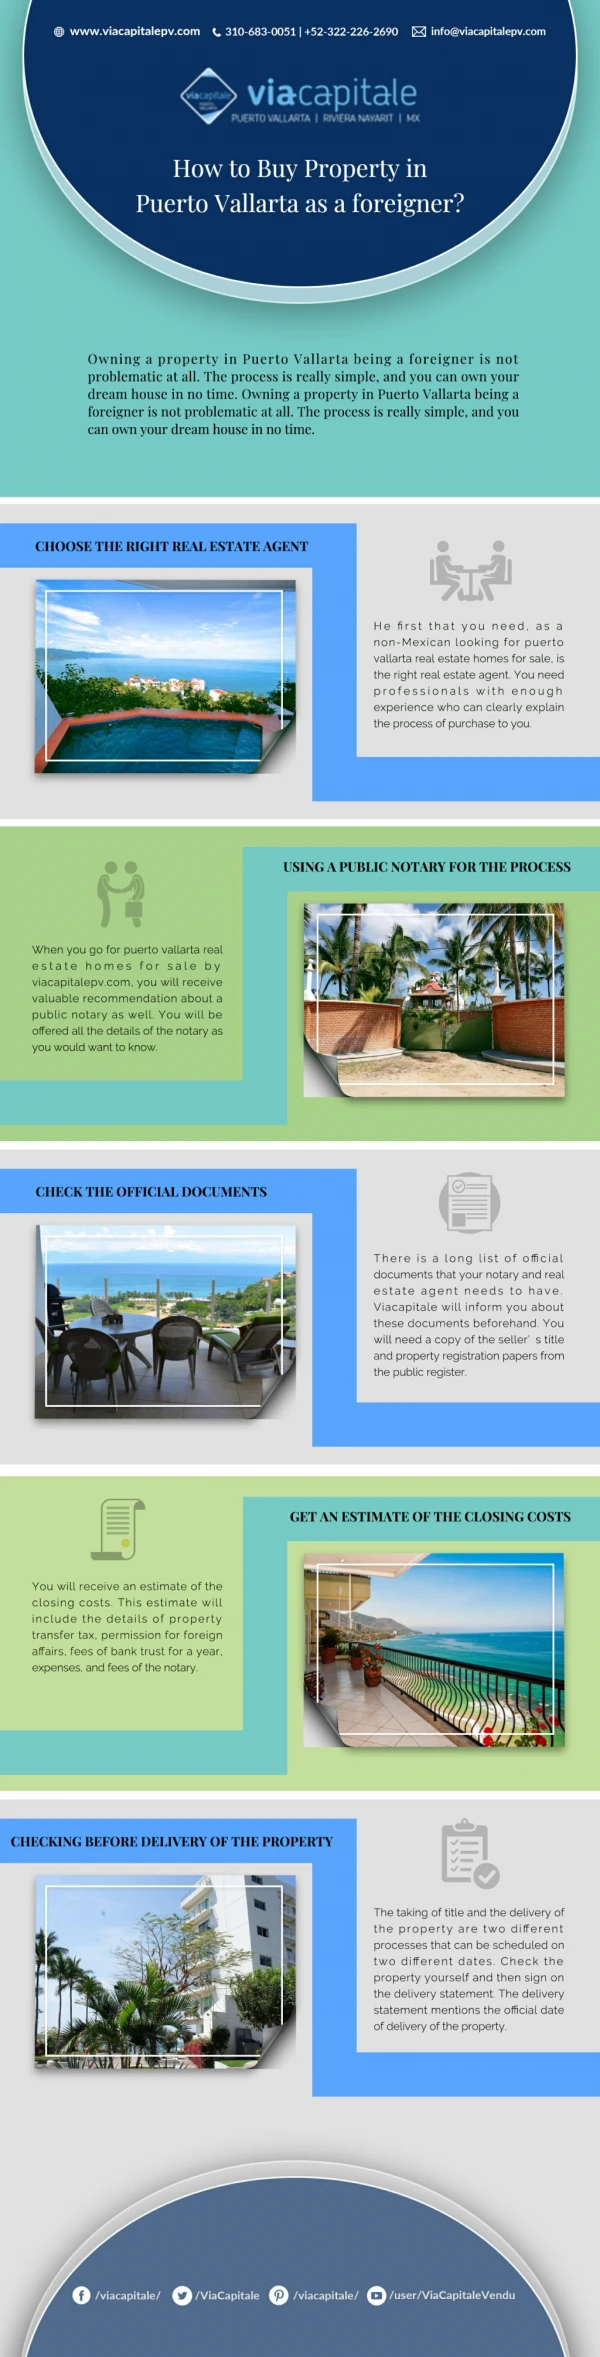 How to Buy Property in Puerto Vallarta as a foreigner?